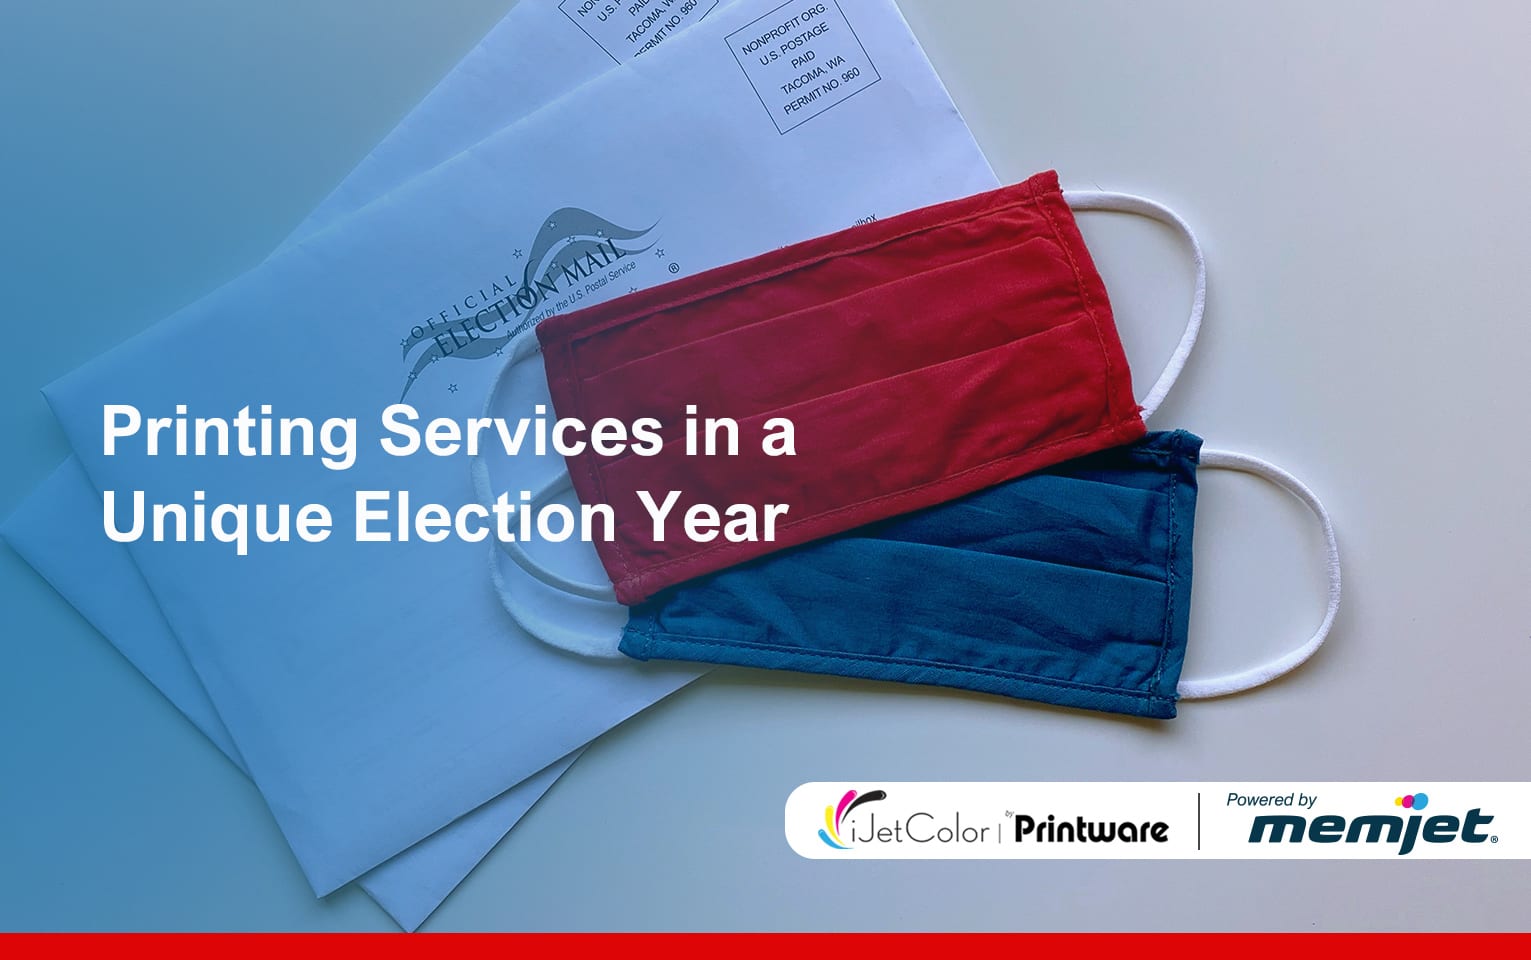 Printing Services in a Unique Election Year